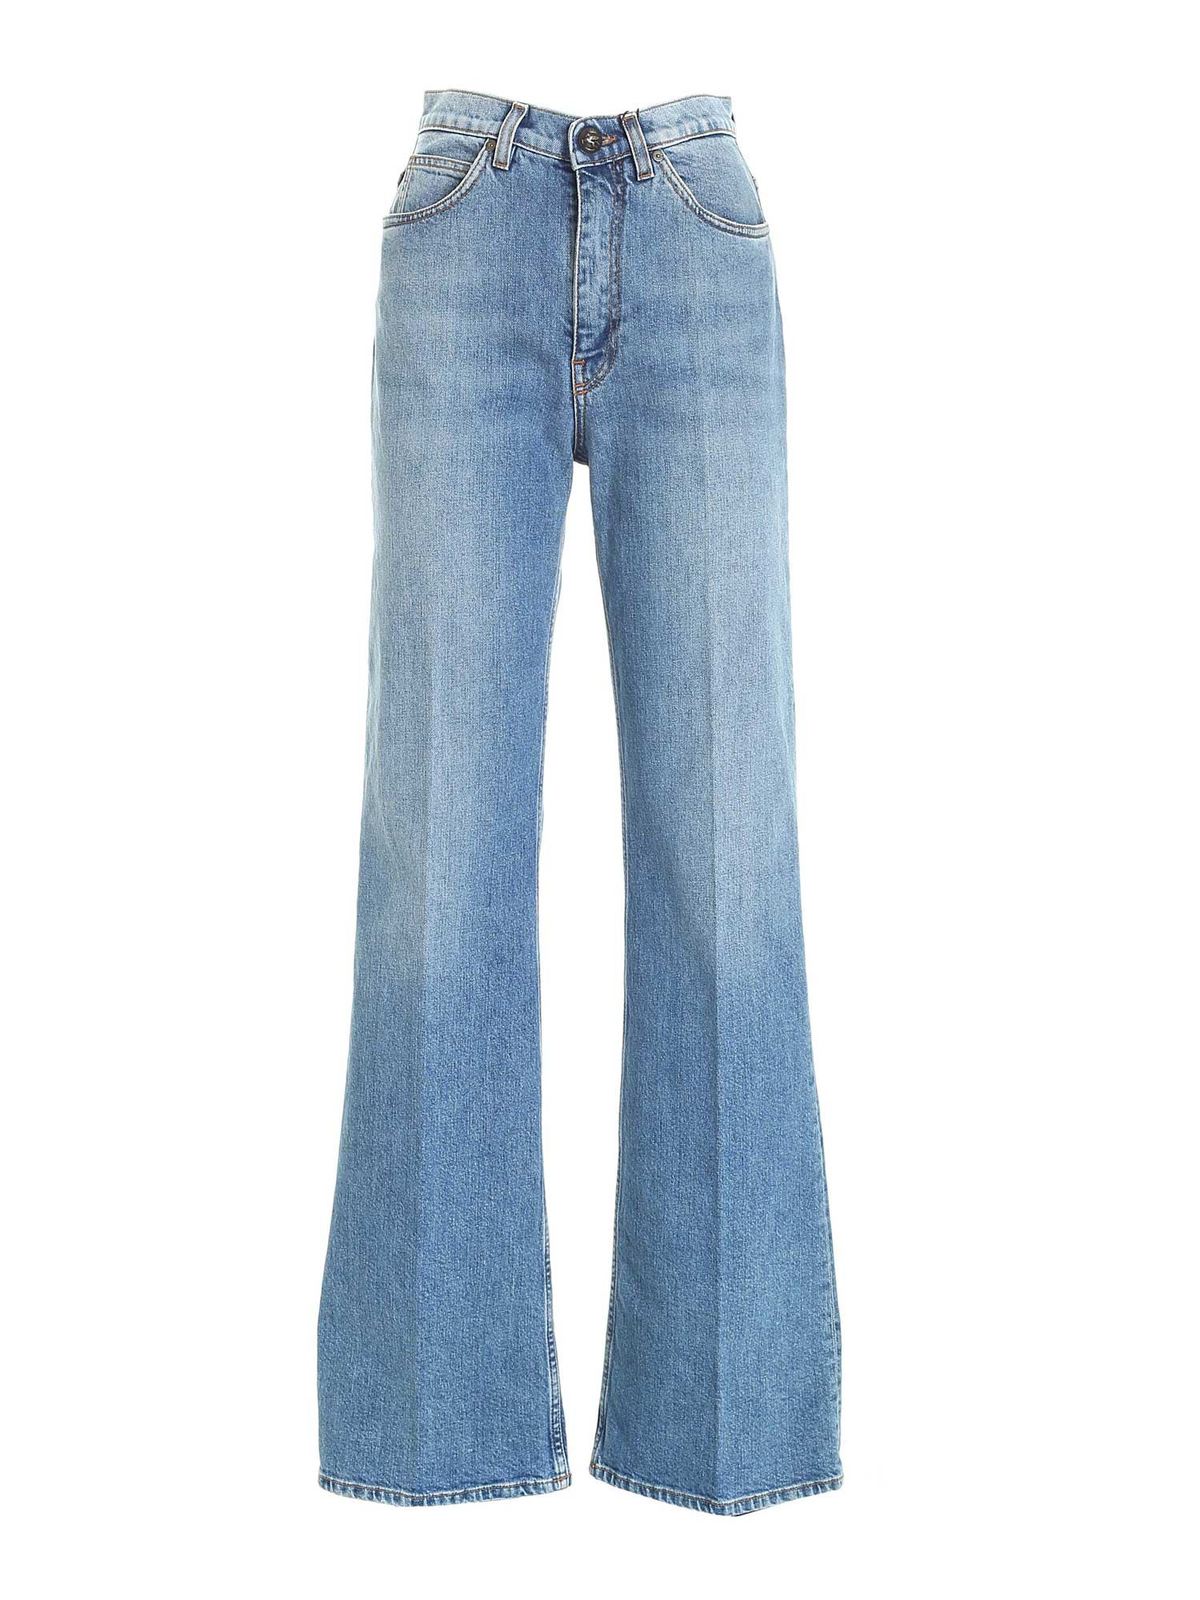 Flared jeans Etro - Palazzo jeans in blue - 184829043200 | iKRIX.com